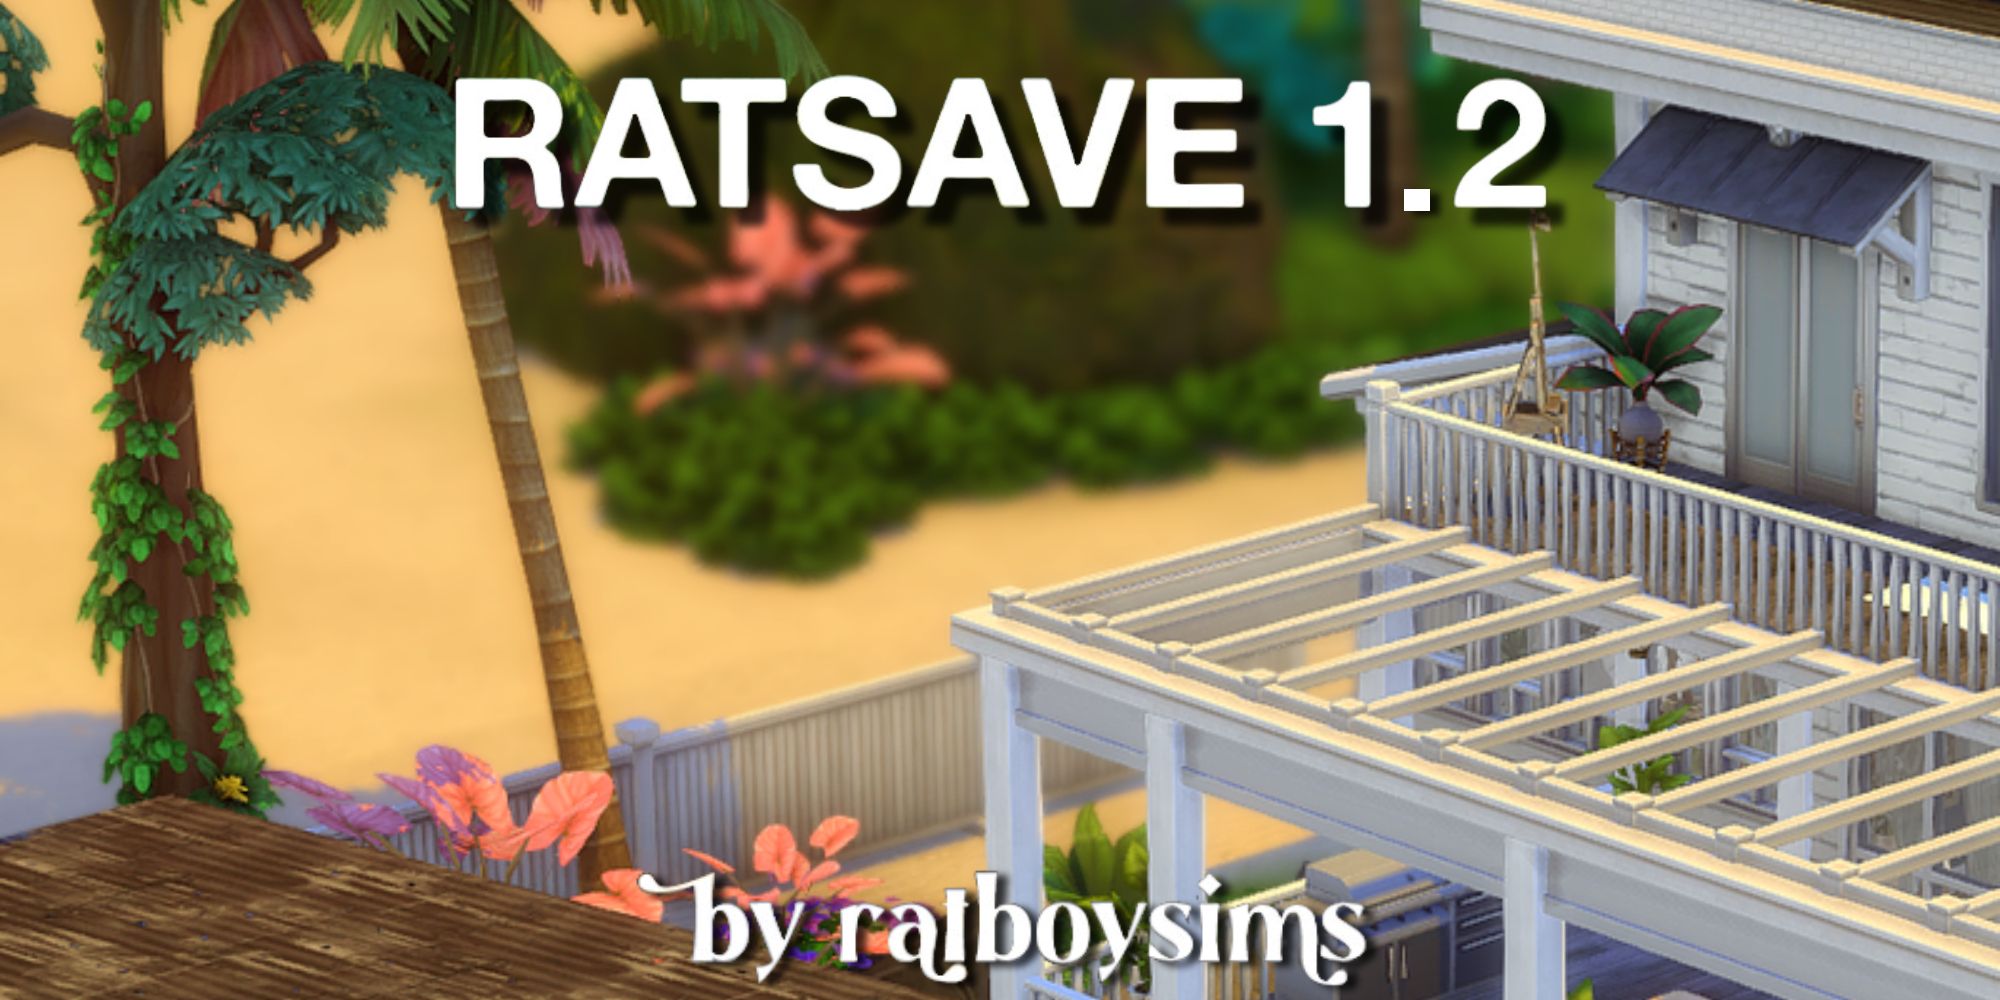 Experience new rebuilds and renovations for three worlds in The Sims 4 with Ratsave 1.2 by ratboysims